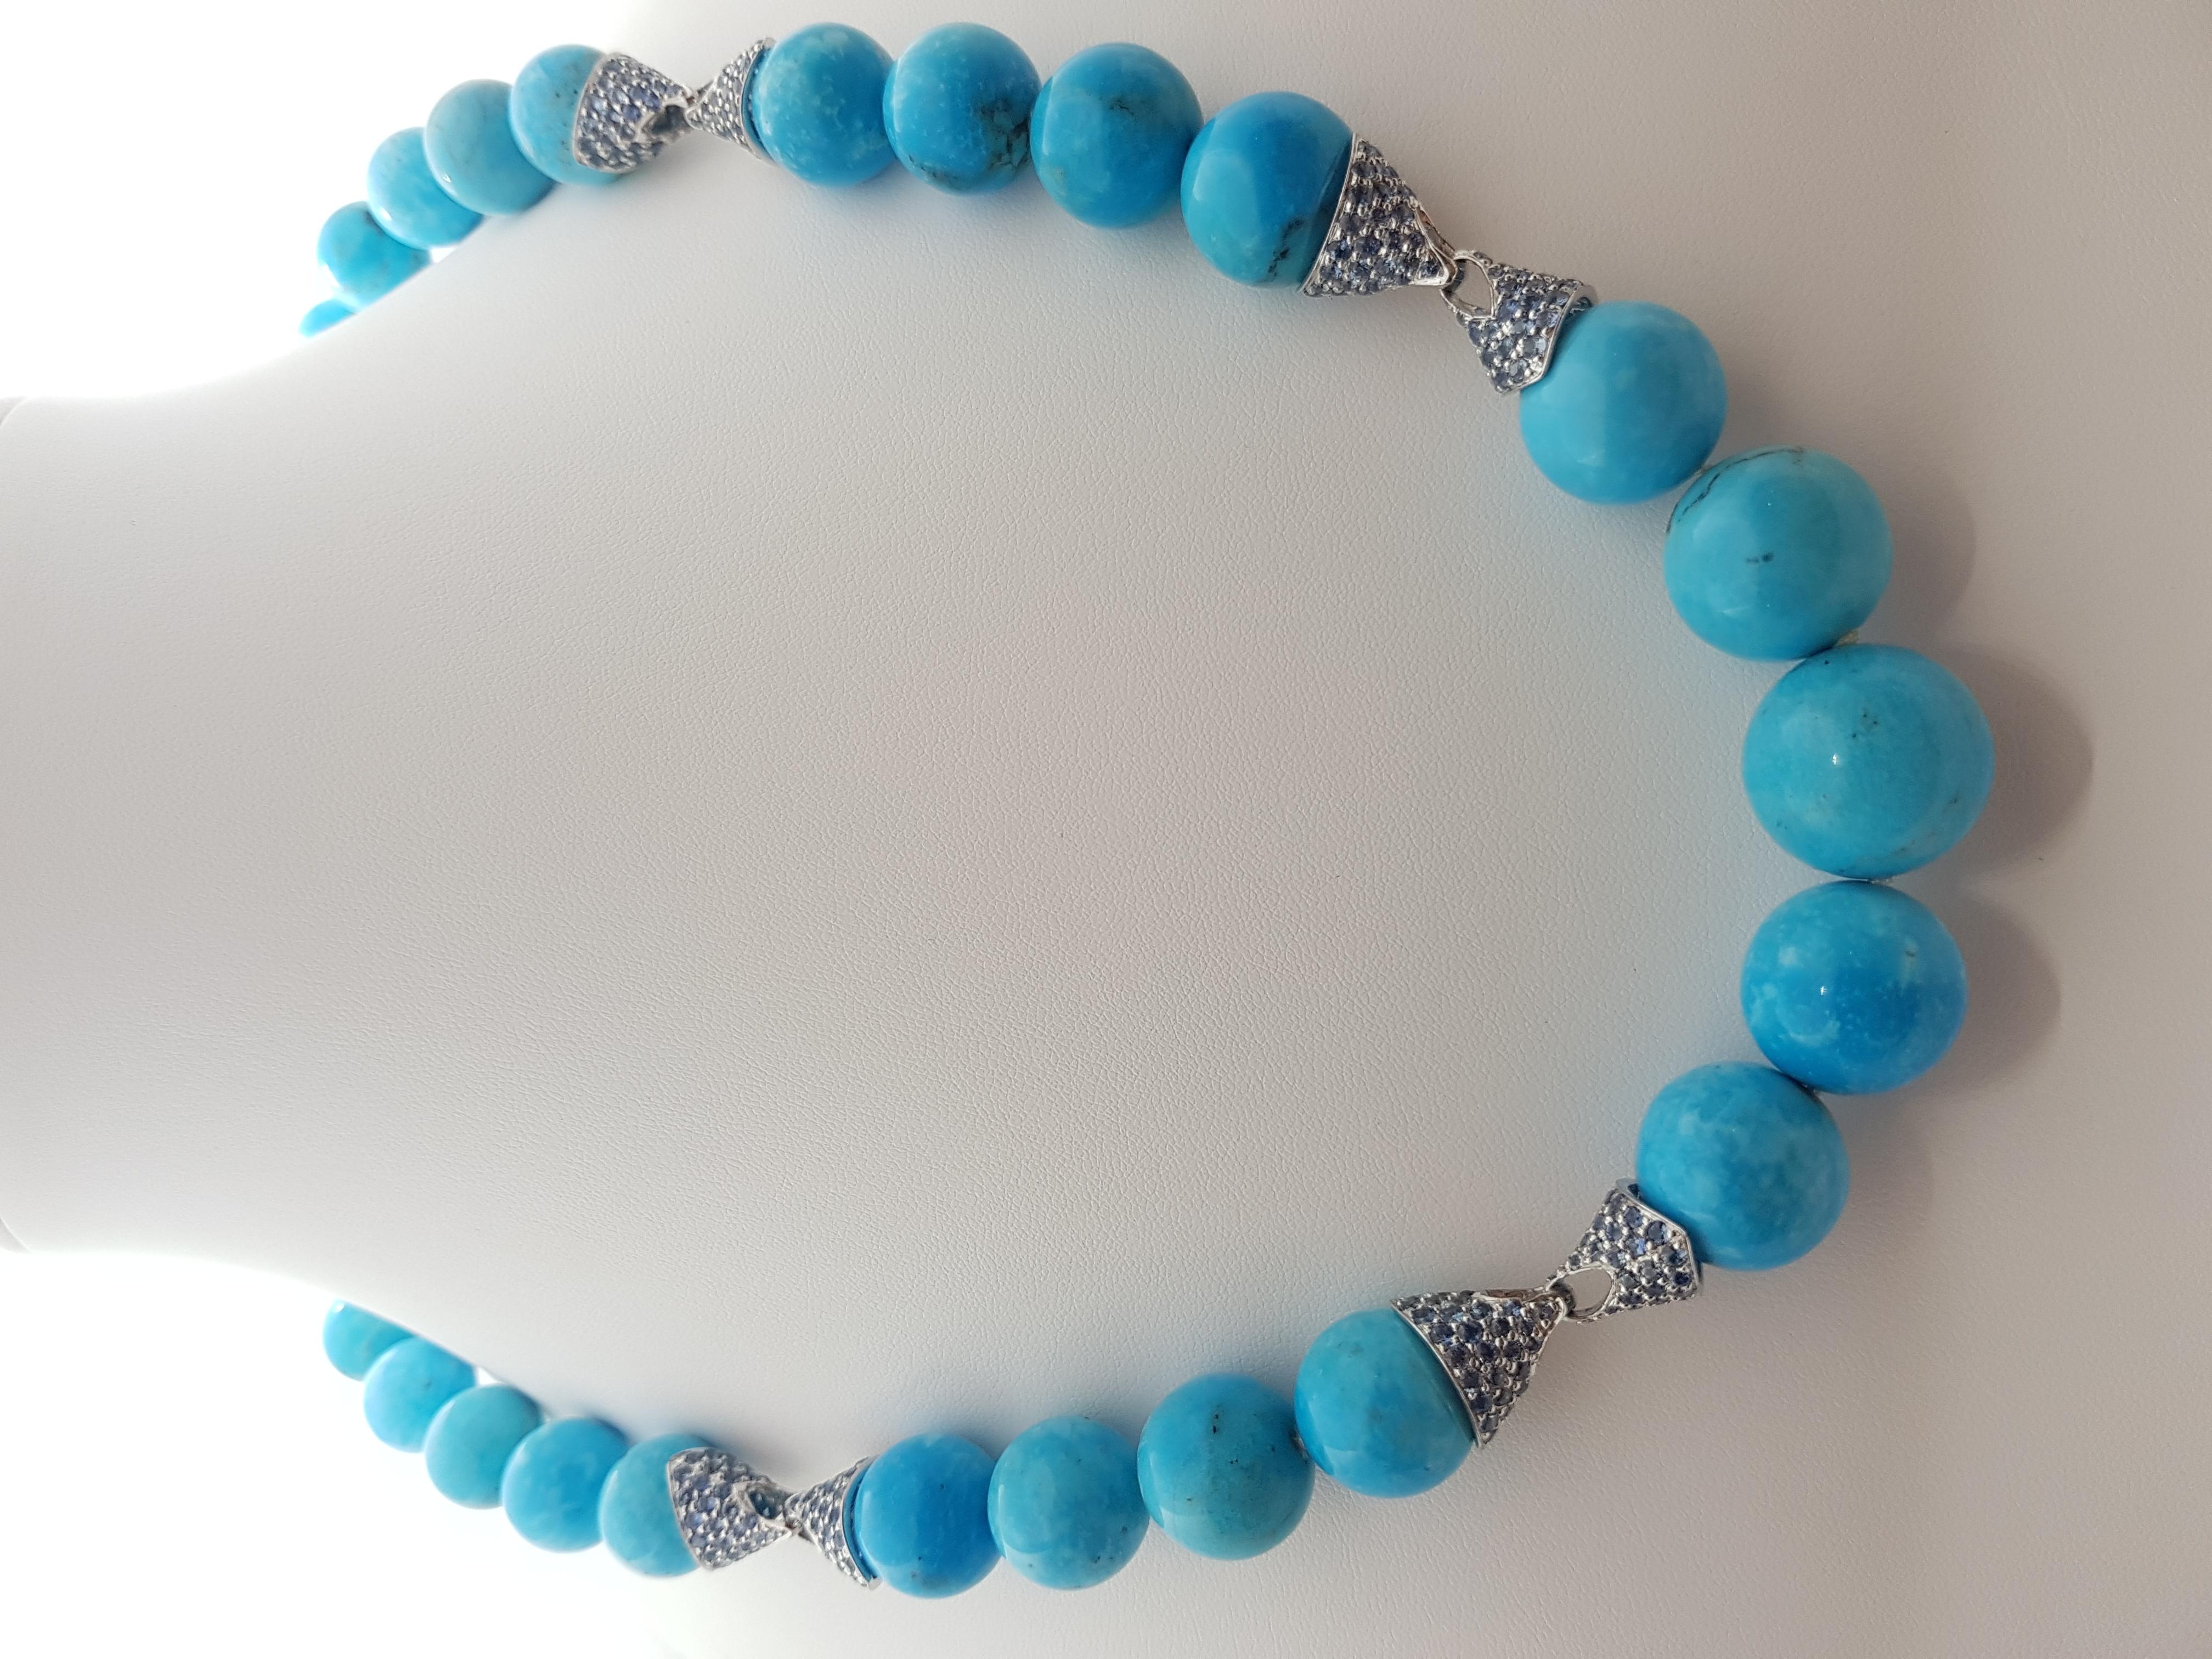 Turquoise with Blue Sapphire 15.13 carats Necklace set in Silver Settings

Width: 1.7  cm 
Length:  58.0 cm
Total Weight: 153.1 grams

*Please note that the silver setting is plated with rhodium to promote shine and help prevent oxidation.  However,